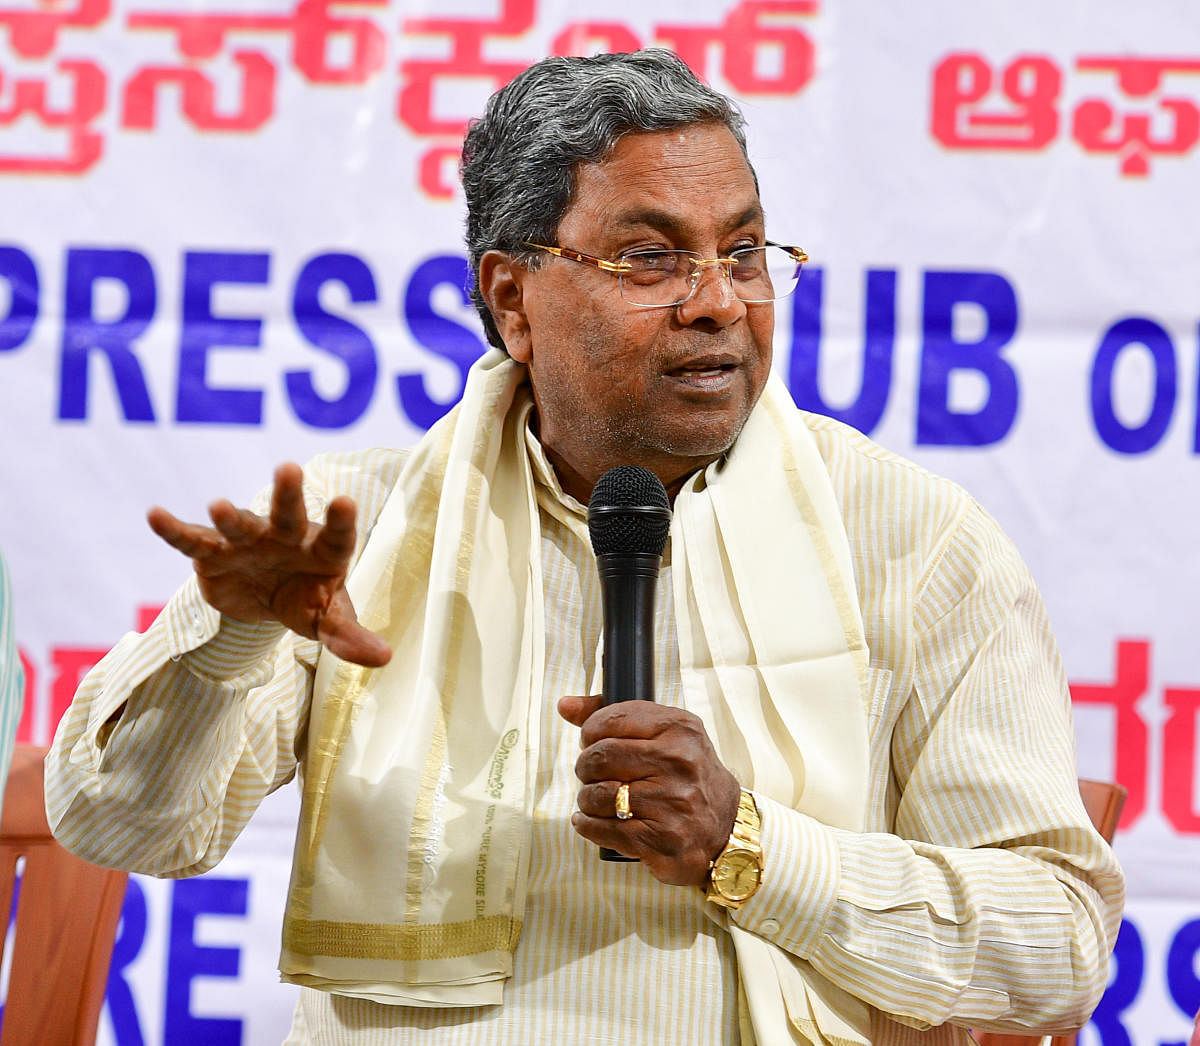 "I feel sorry for Yediyurappa as he has no freedom to induct ministers," Siddaramaiah said. (DH File Photo)